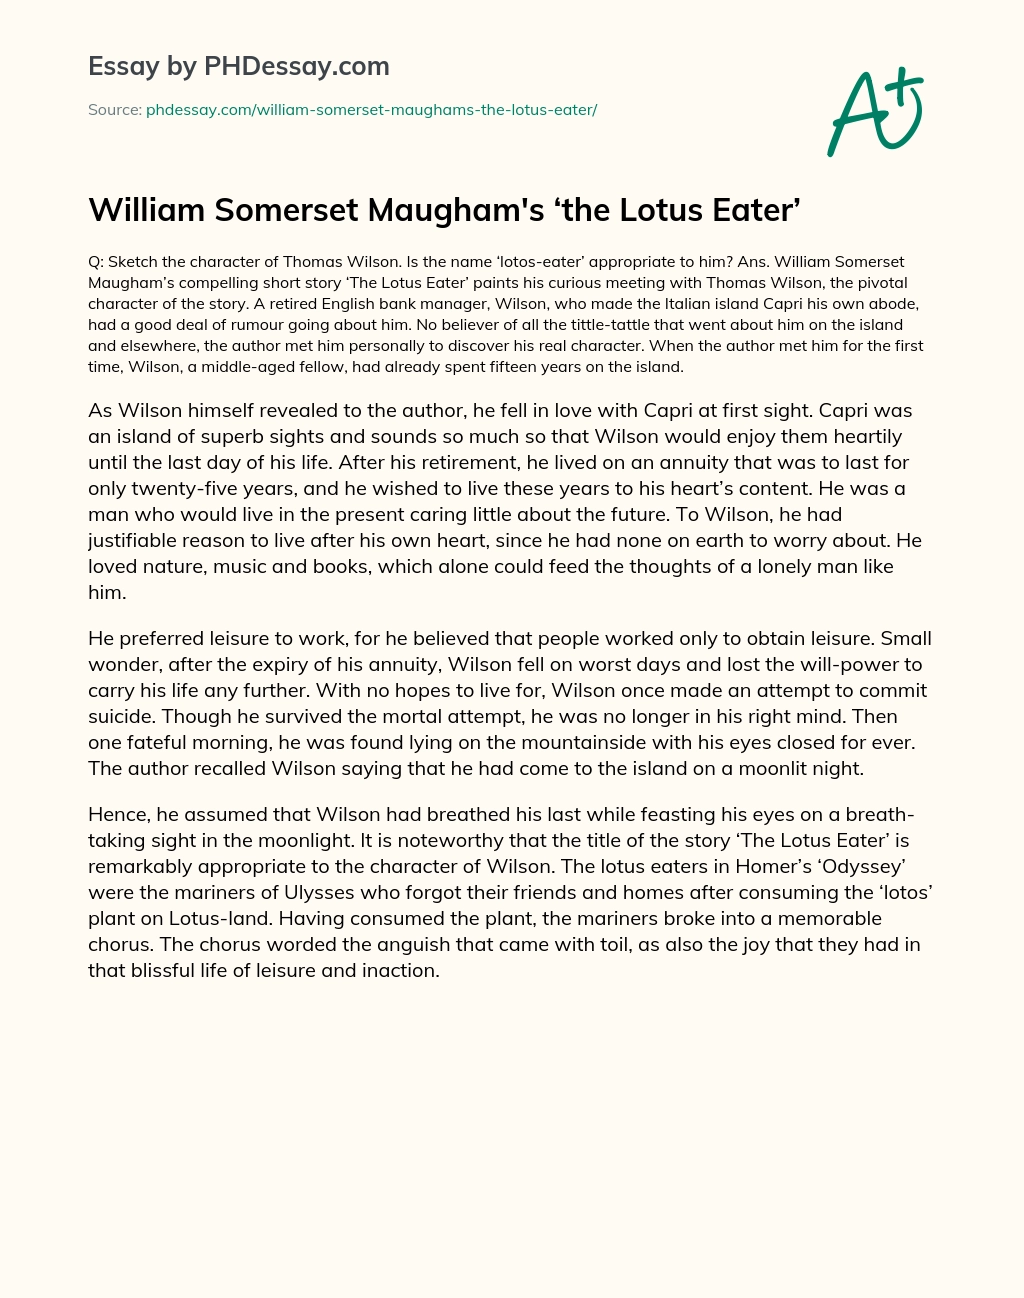 William Somerset Maugham’s ‘the Lotus Eater’ essay